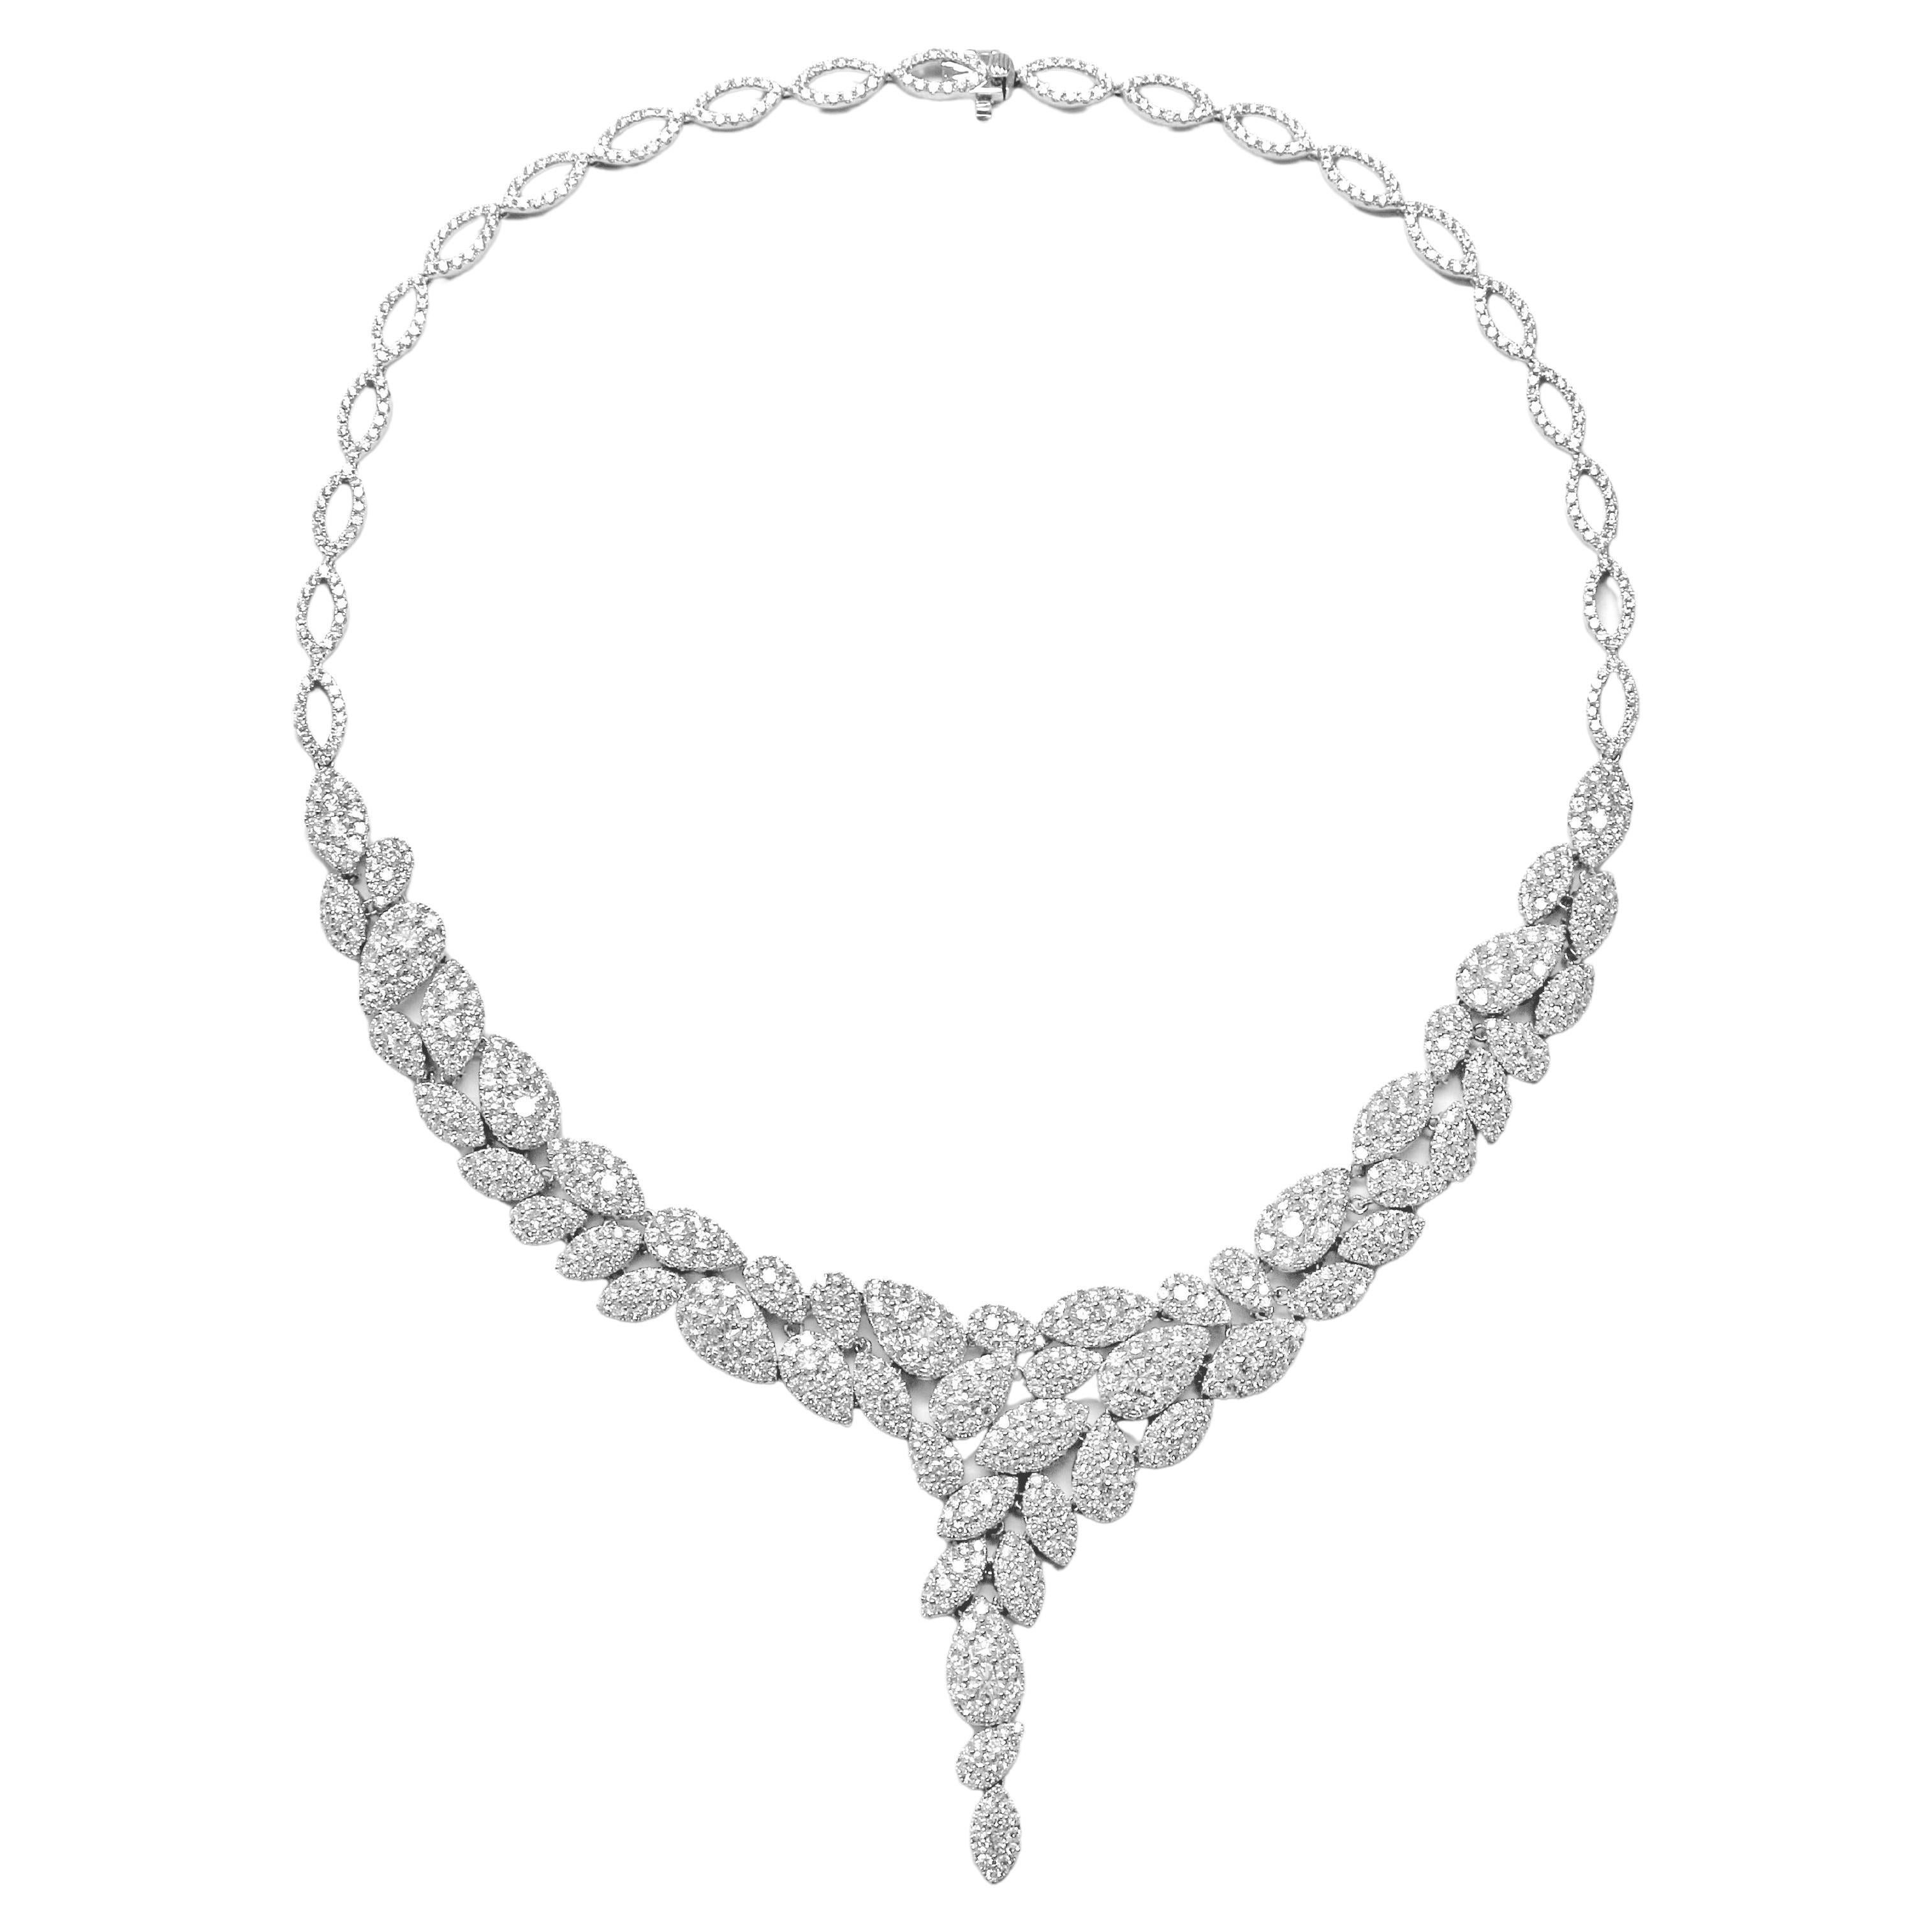 Captivating 18KW Diamond Necklace - 22.08ct, G Color, SI1 Clarity For Sale